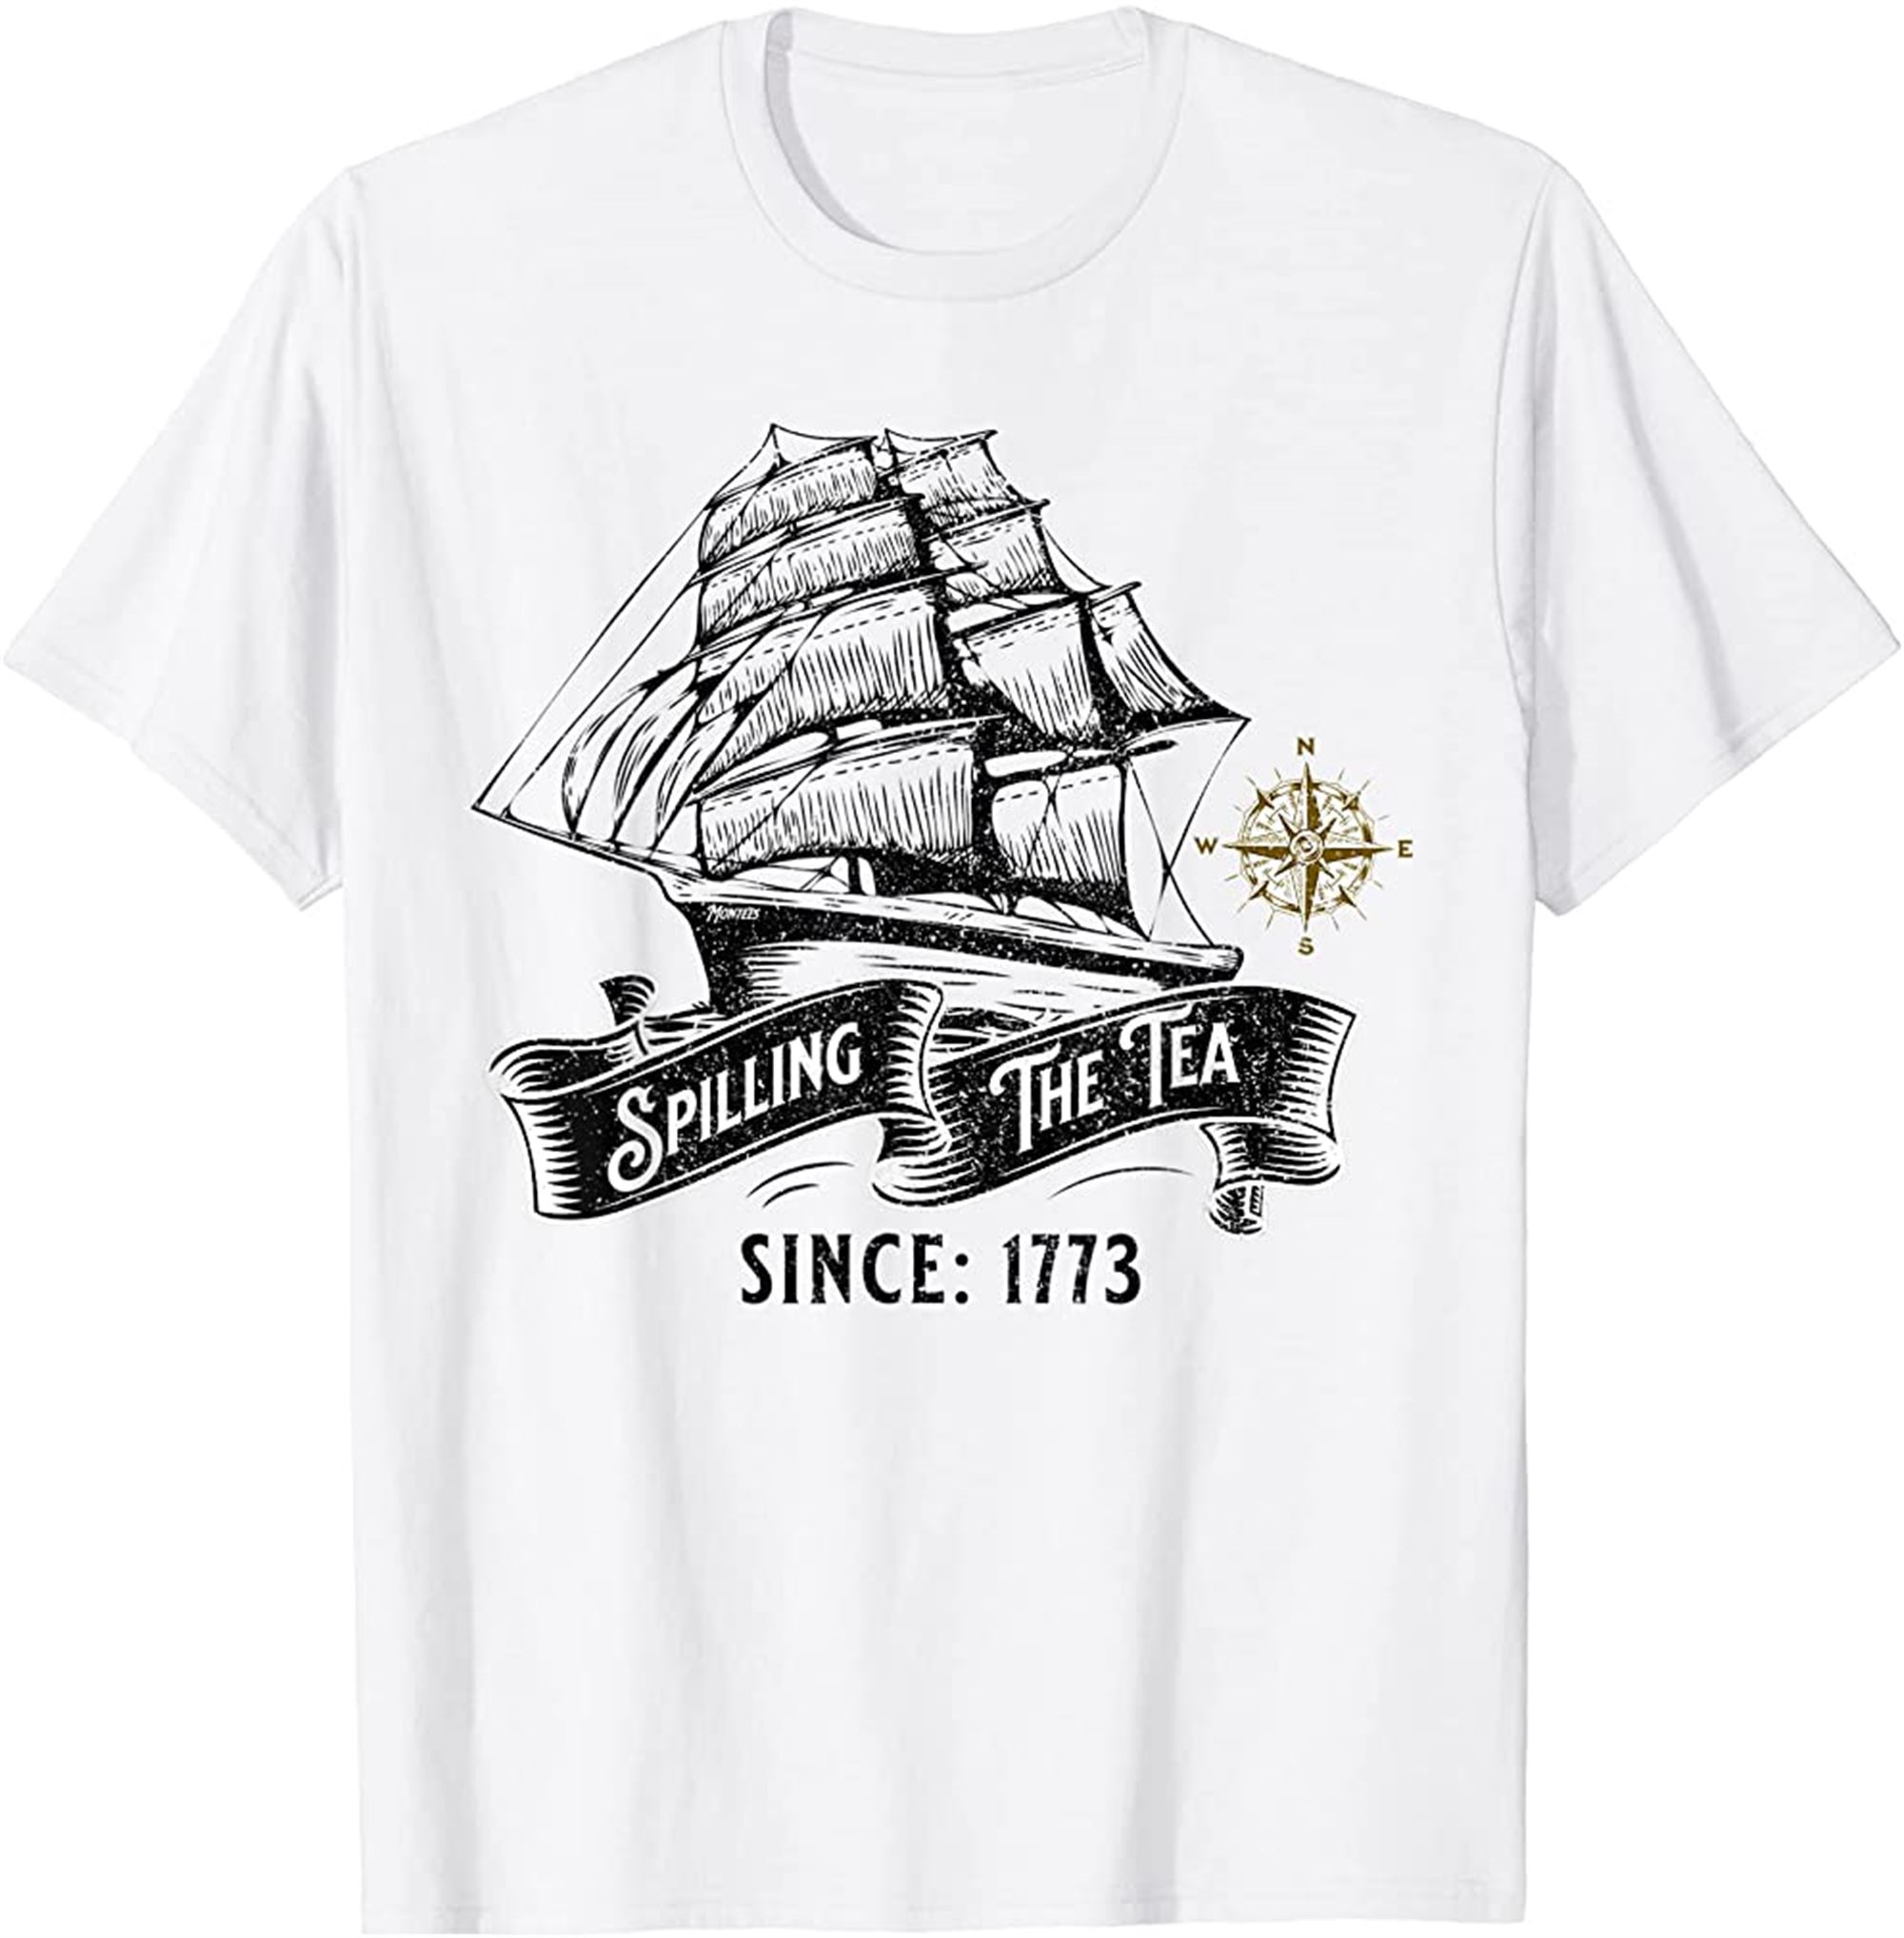 Spilling The Tea Since 1773 Tee Funny Patriotic 4th Of July T-shirt Size Up To 5xl